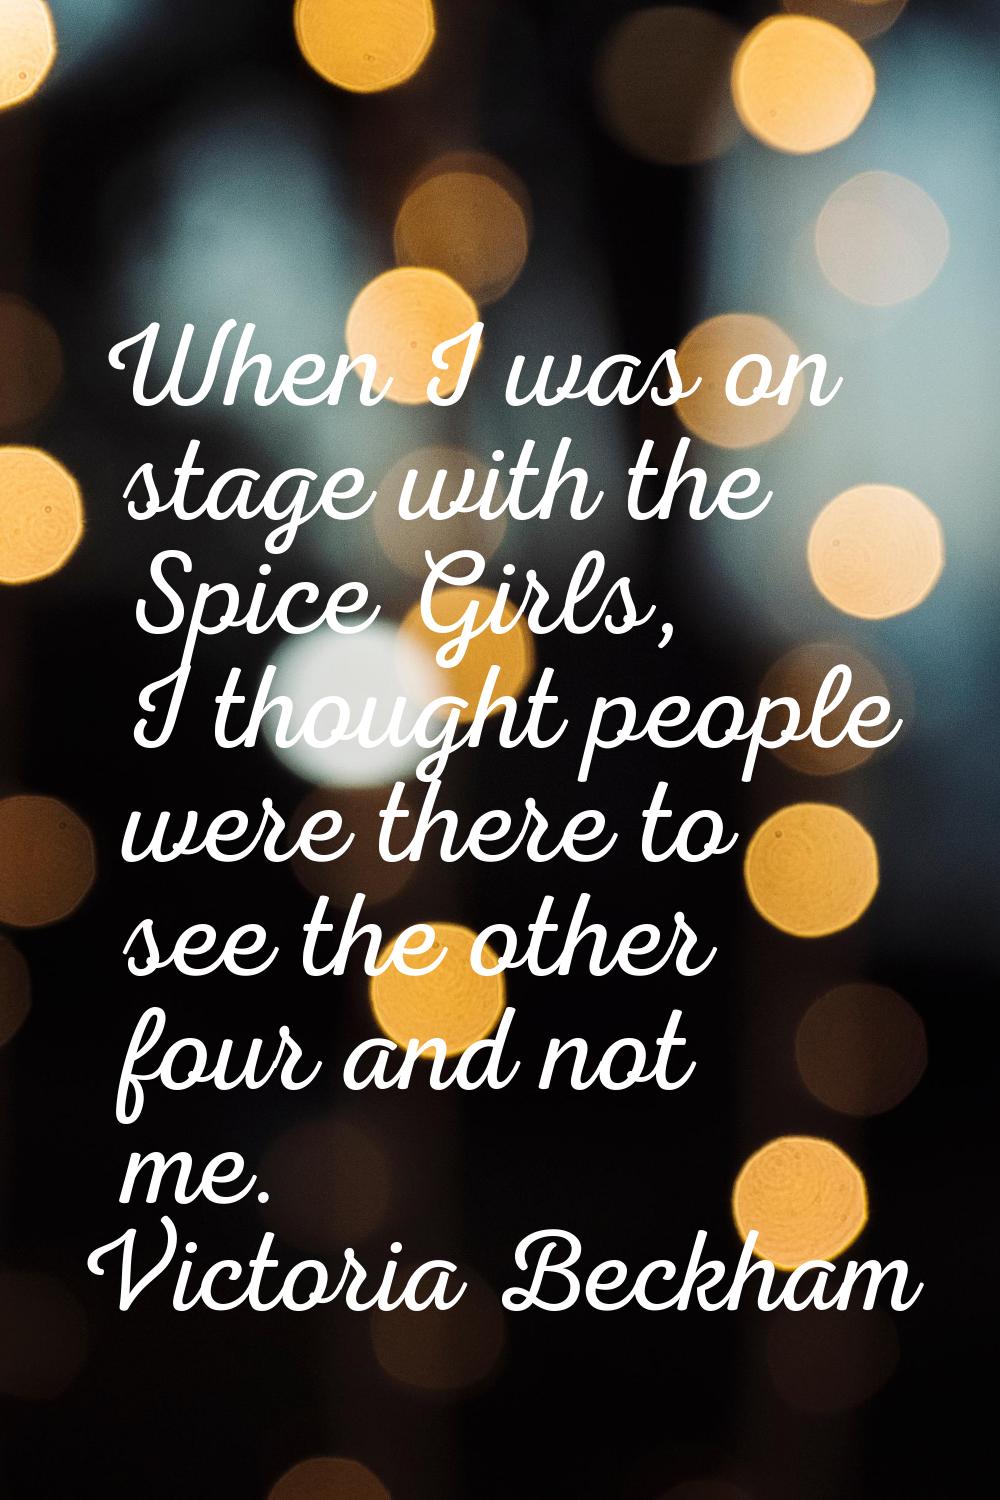 When I was on stage with the Spice Girls, I thought people were there to see the other four and not